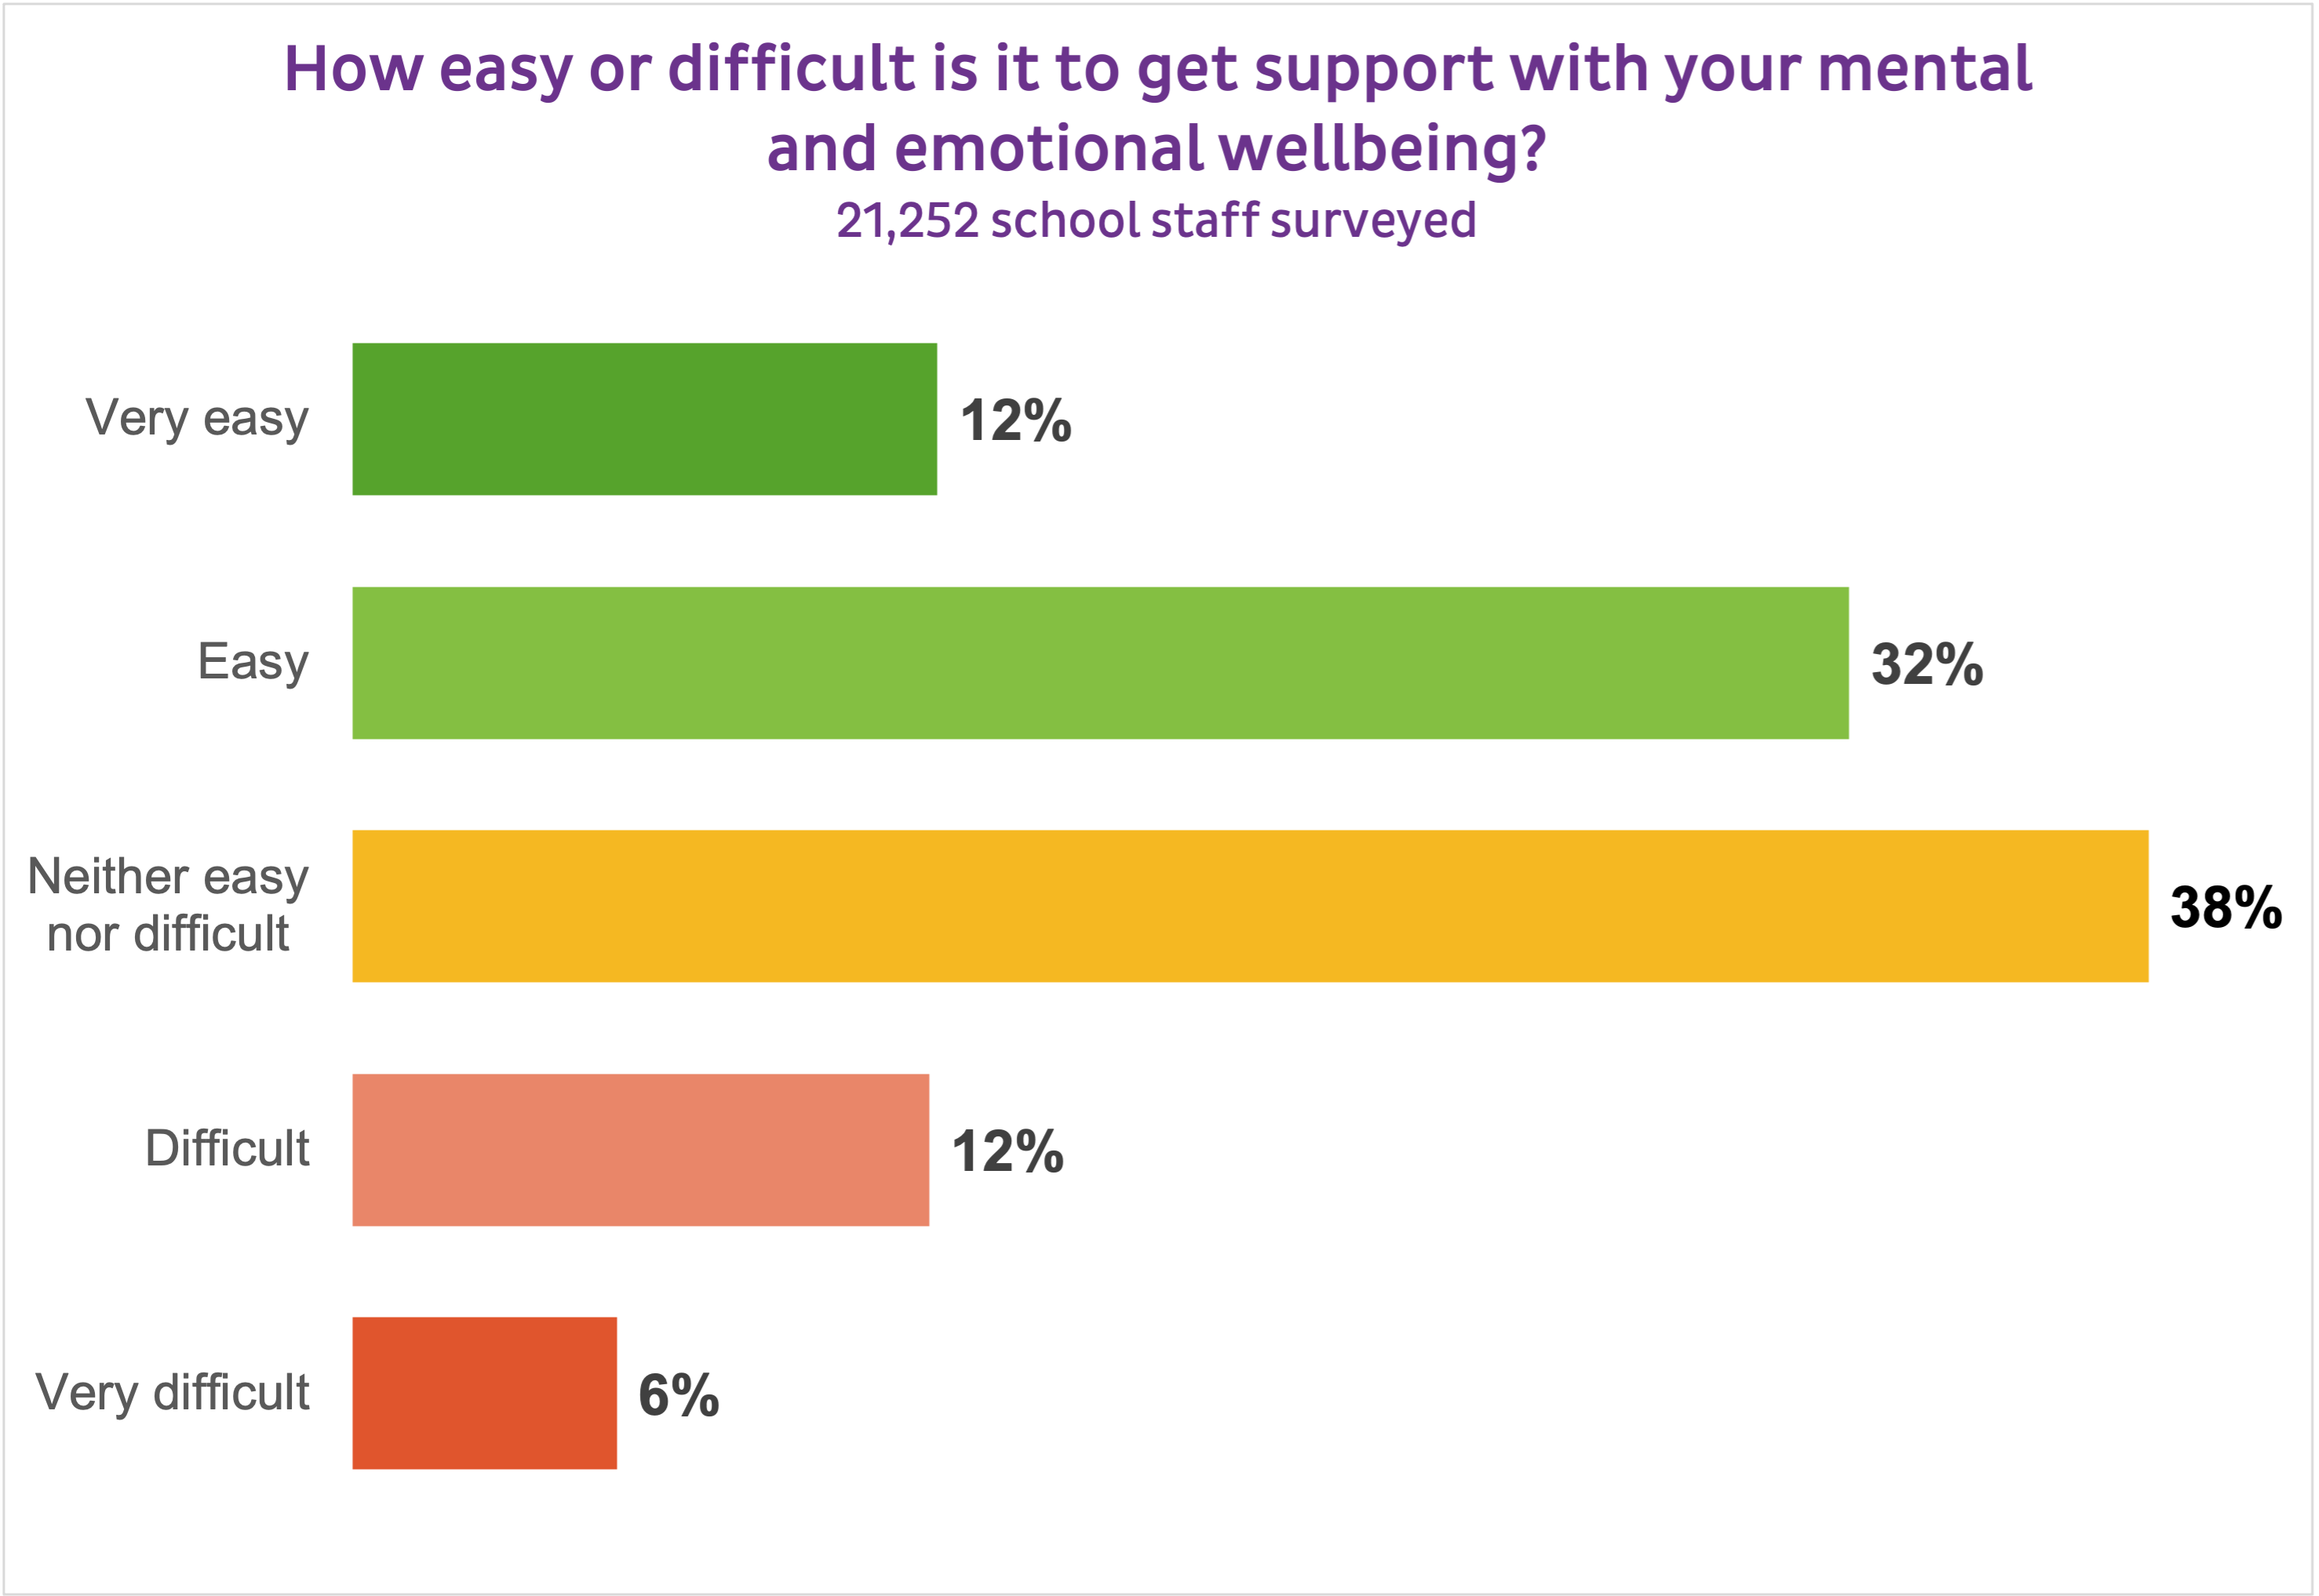 GRAPH 
In this image, there is a graph which represents the data from the question, "How easy or difficult is it to get support with your mental health and emotional wellbeing?"
12% said very easy, 32% said easy, 38% said neither easy nor difficult, 12% said difficult and 6% said very difficult.